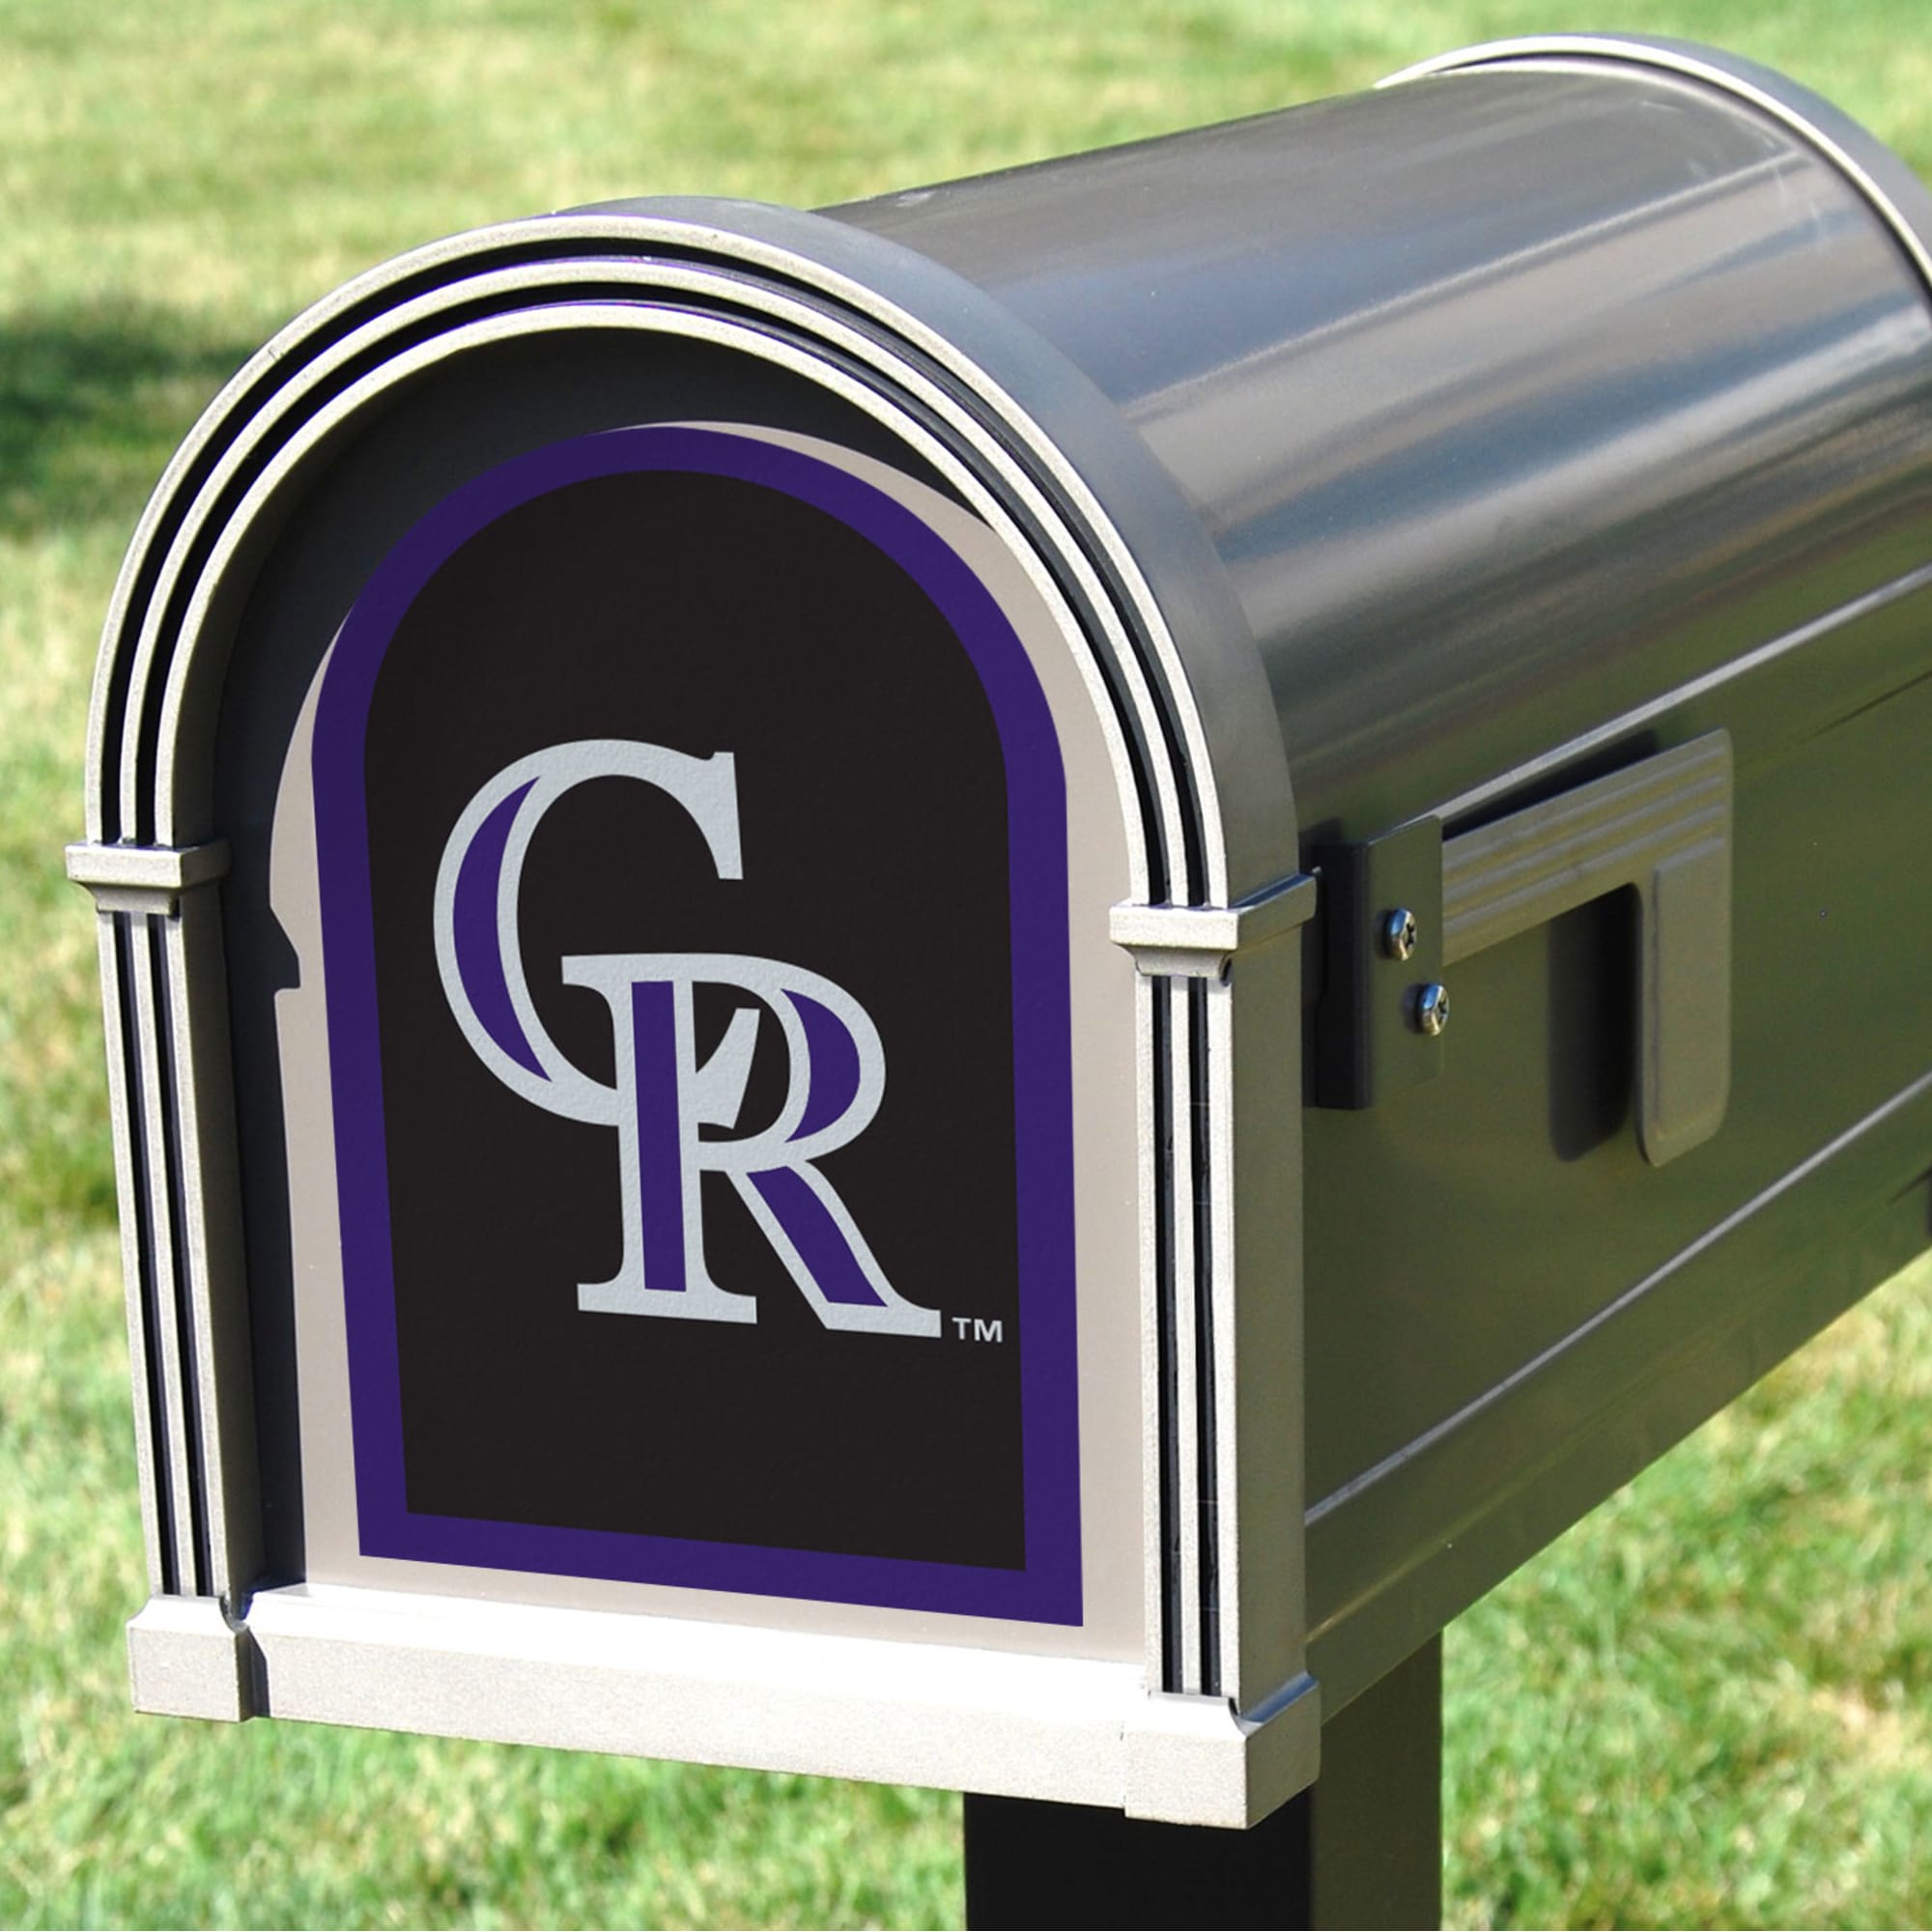 Colorado Rockies: Mailbox Logo - Officially Licensed MLB Outdoor Graphic 5.0"W x 8.0"H by Fathead | Wood/Aluminum